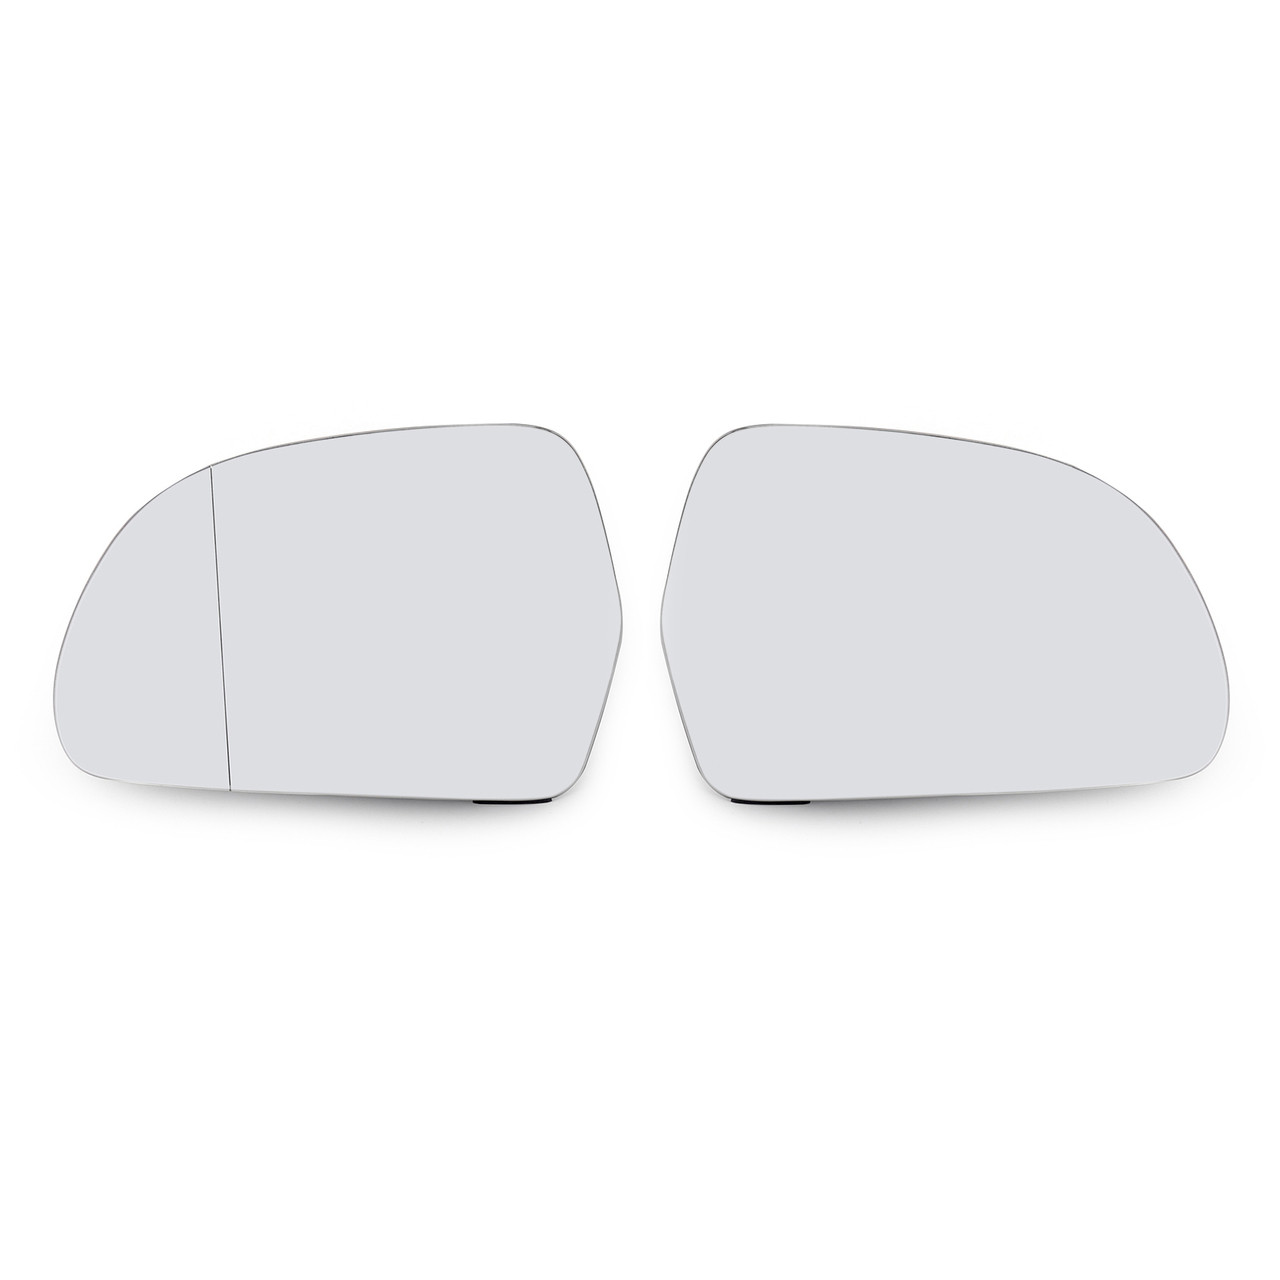 Rearview Mirror Glass Heated For Audi A6 Allroad (07-11) A8 S8 (08-10) Q3 (12-16) OCTAVIA (09-13) SUPERB (08-13)